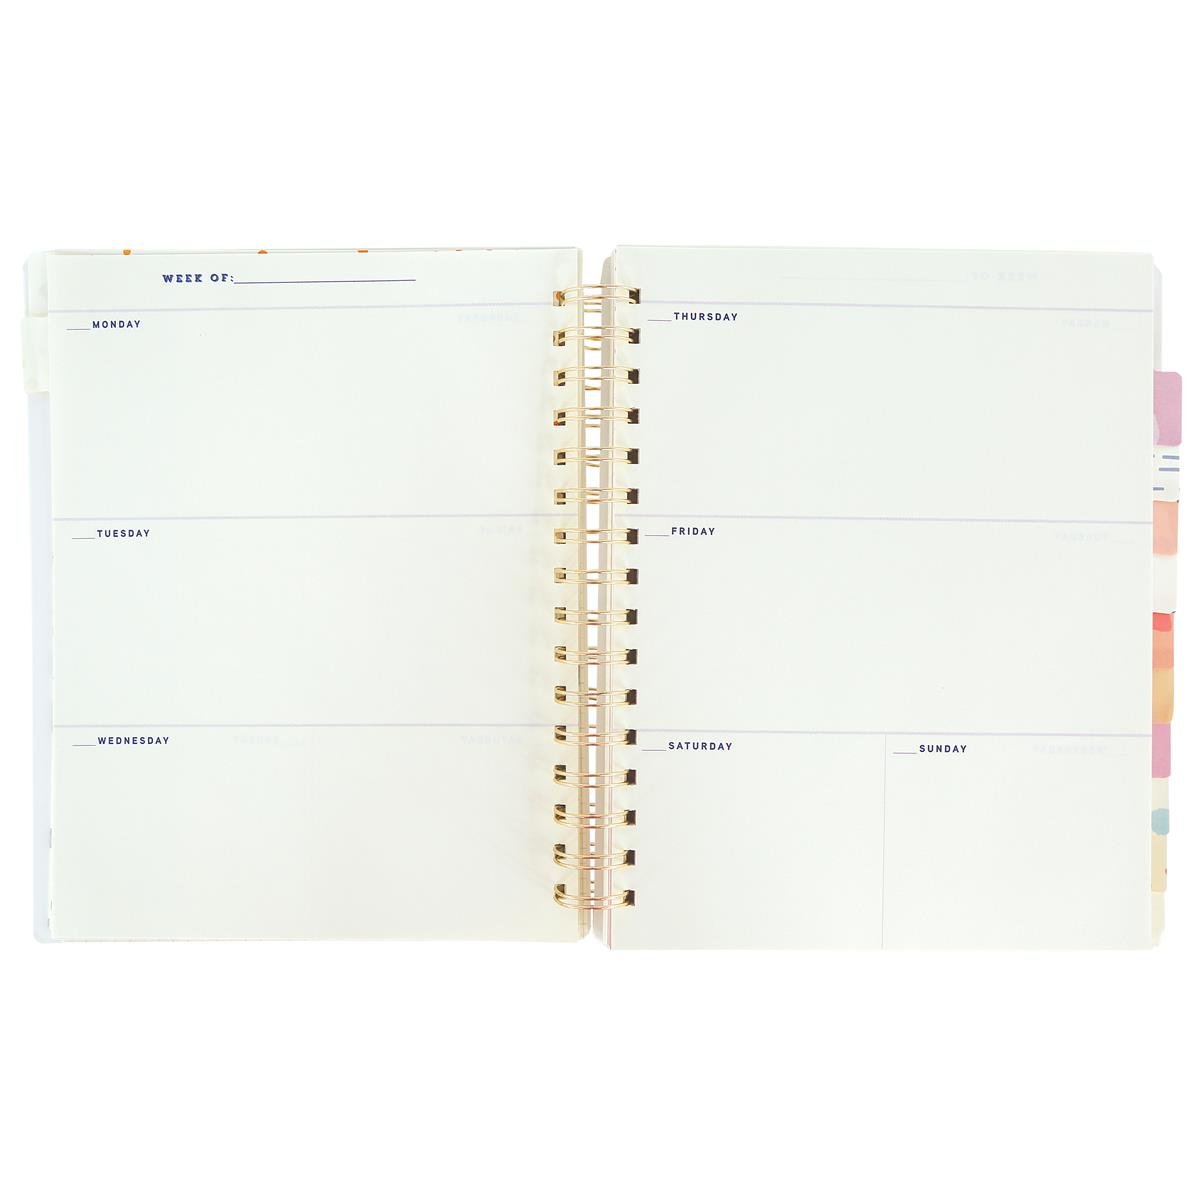 Last Call! Mondays, Am I Right? Spiral Undated Planner With Shiny Gold Wiro